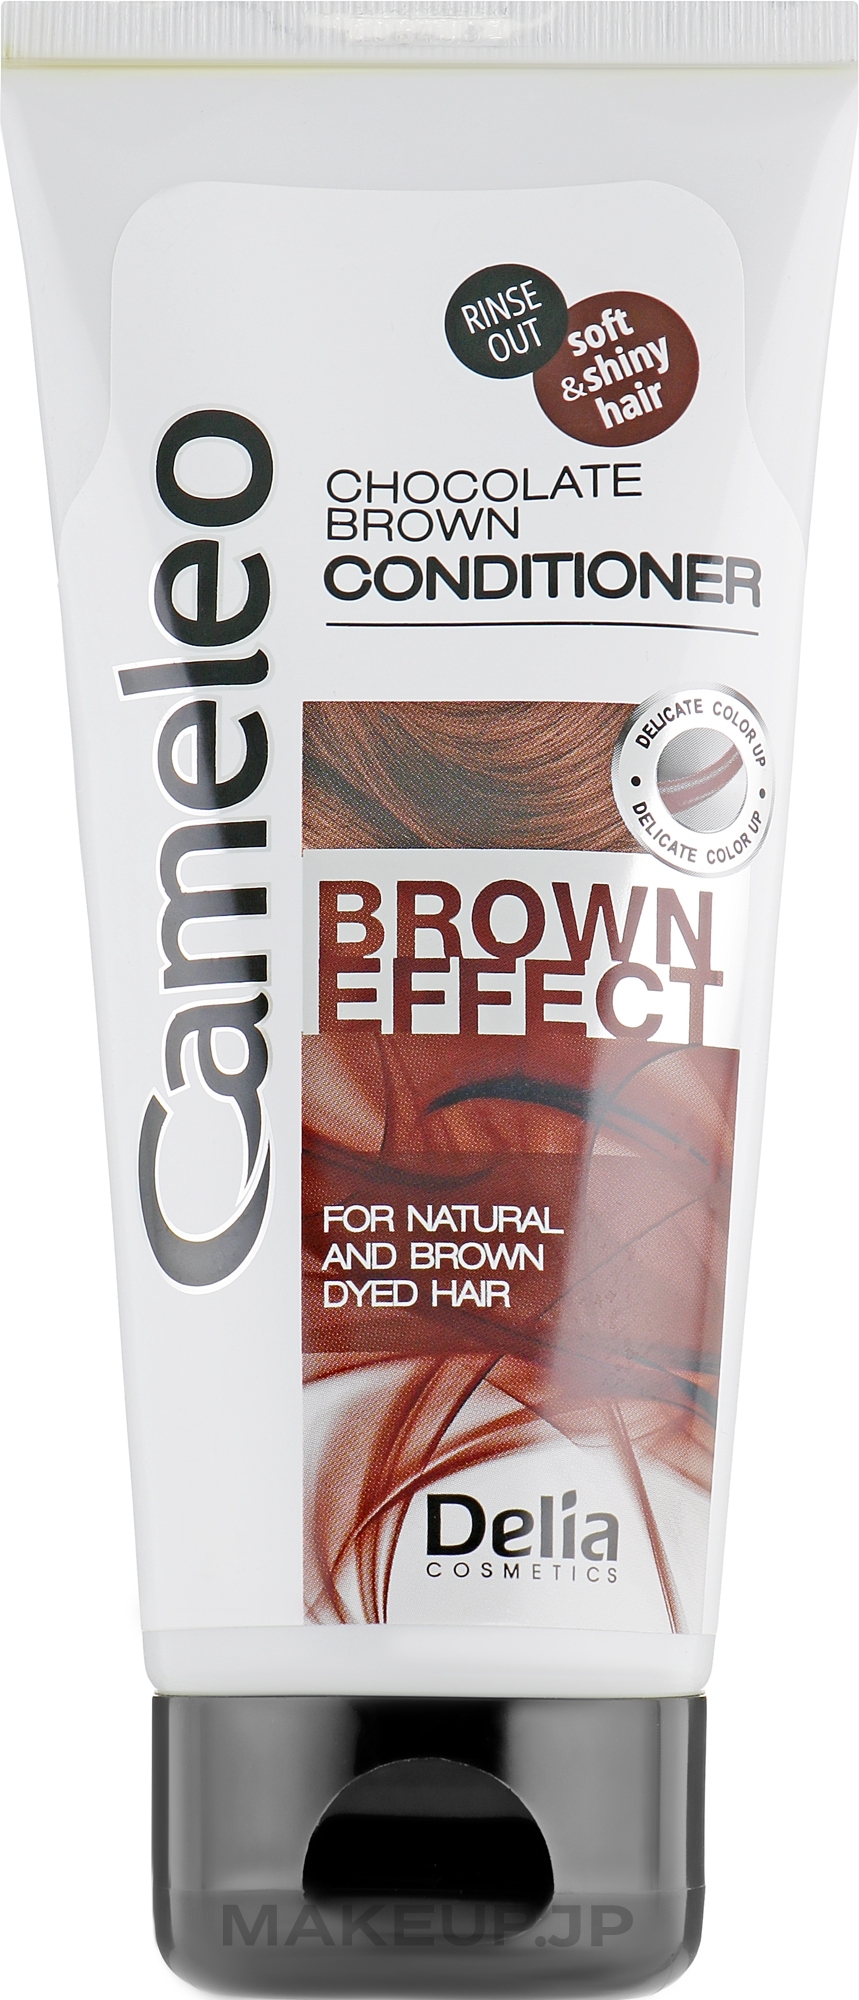 Intensive Regenerating Conditioner with Brown Shade - Delia Cosmetics Cameleo Brown Effect — photo 200 ml